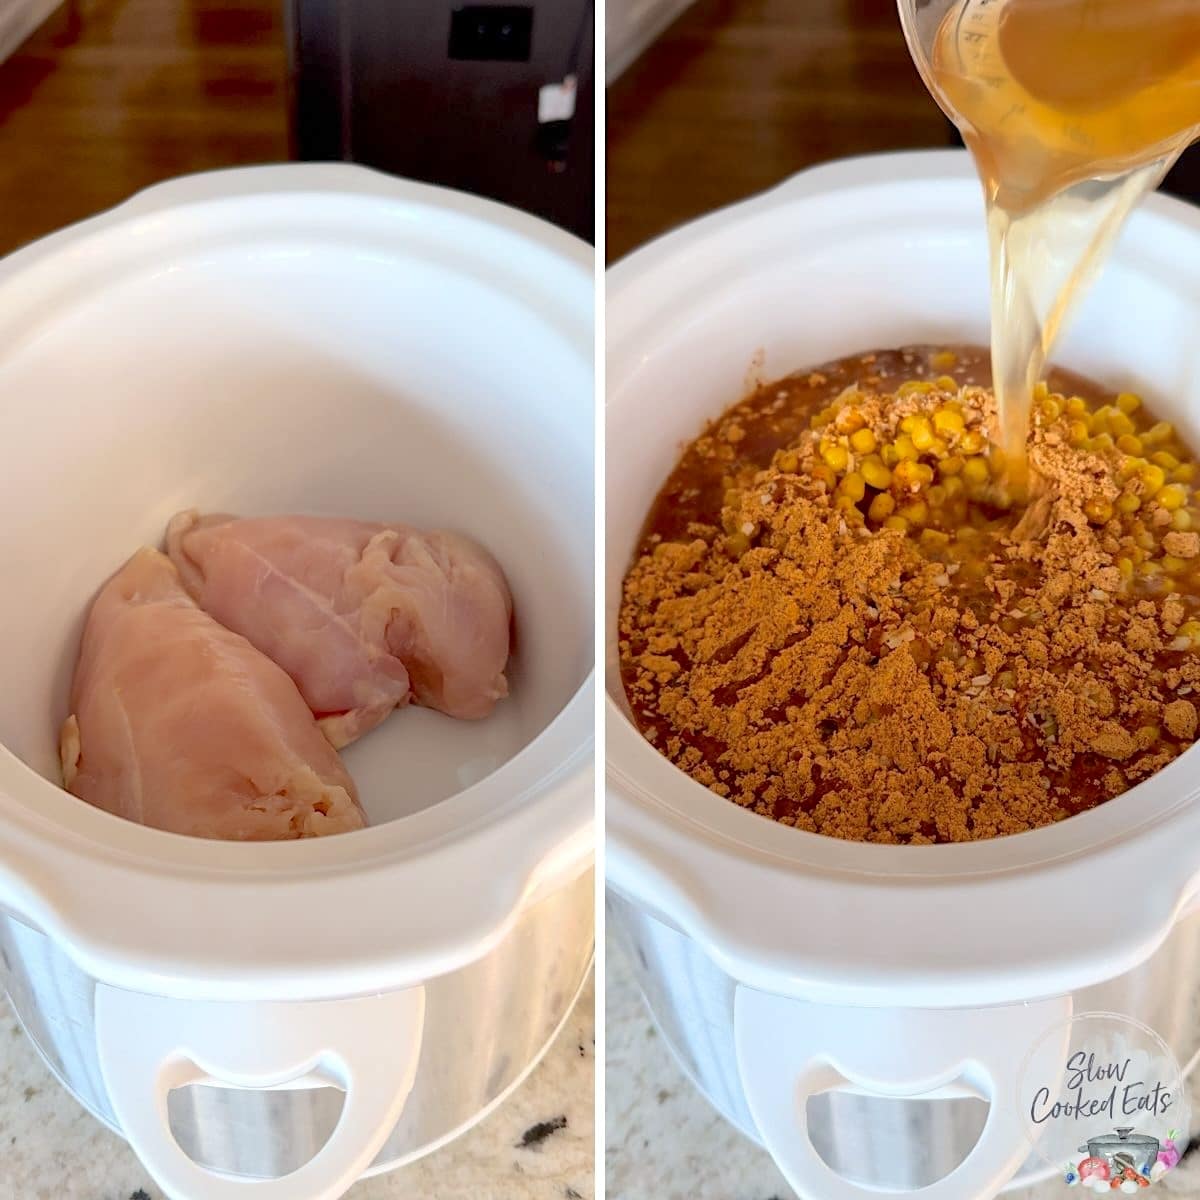 Adding the chicken and ingredients to make slow cooker chicken taco soup in a white oval crockpot.